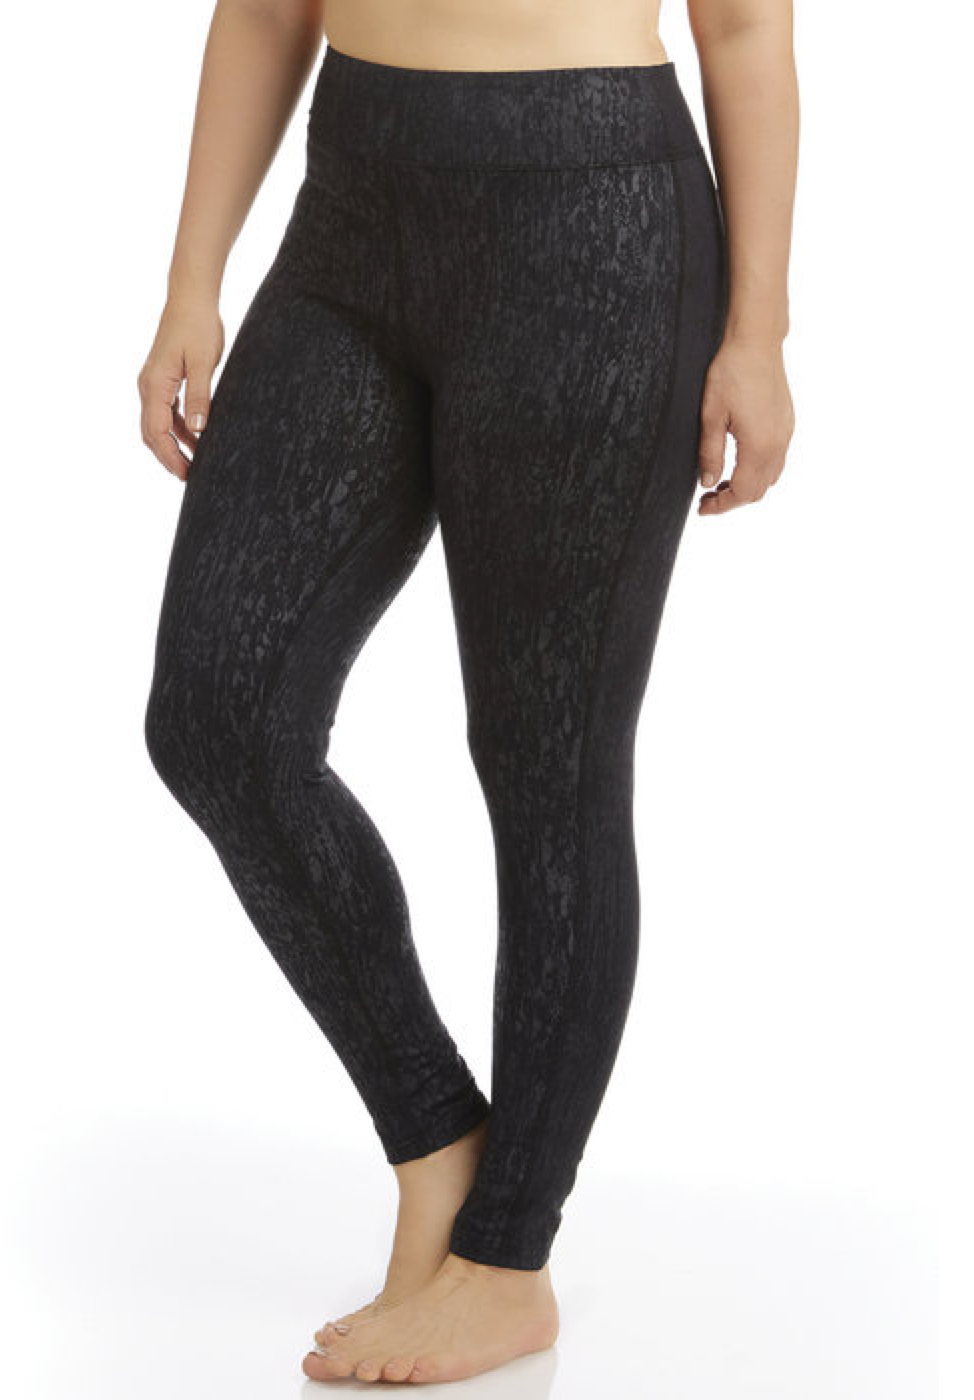 The 11 Best Places to Buy Leggings Online, Period